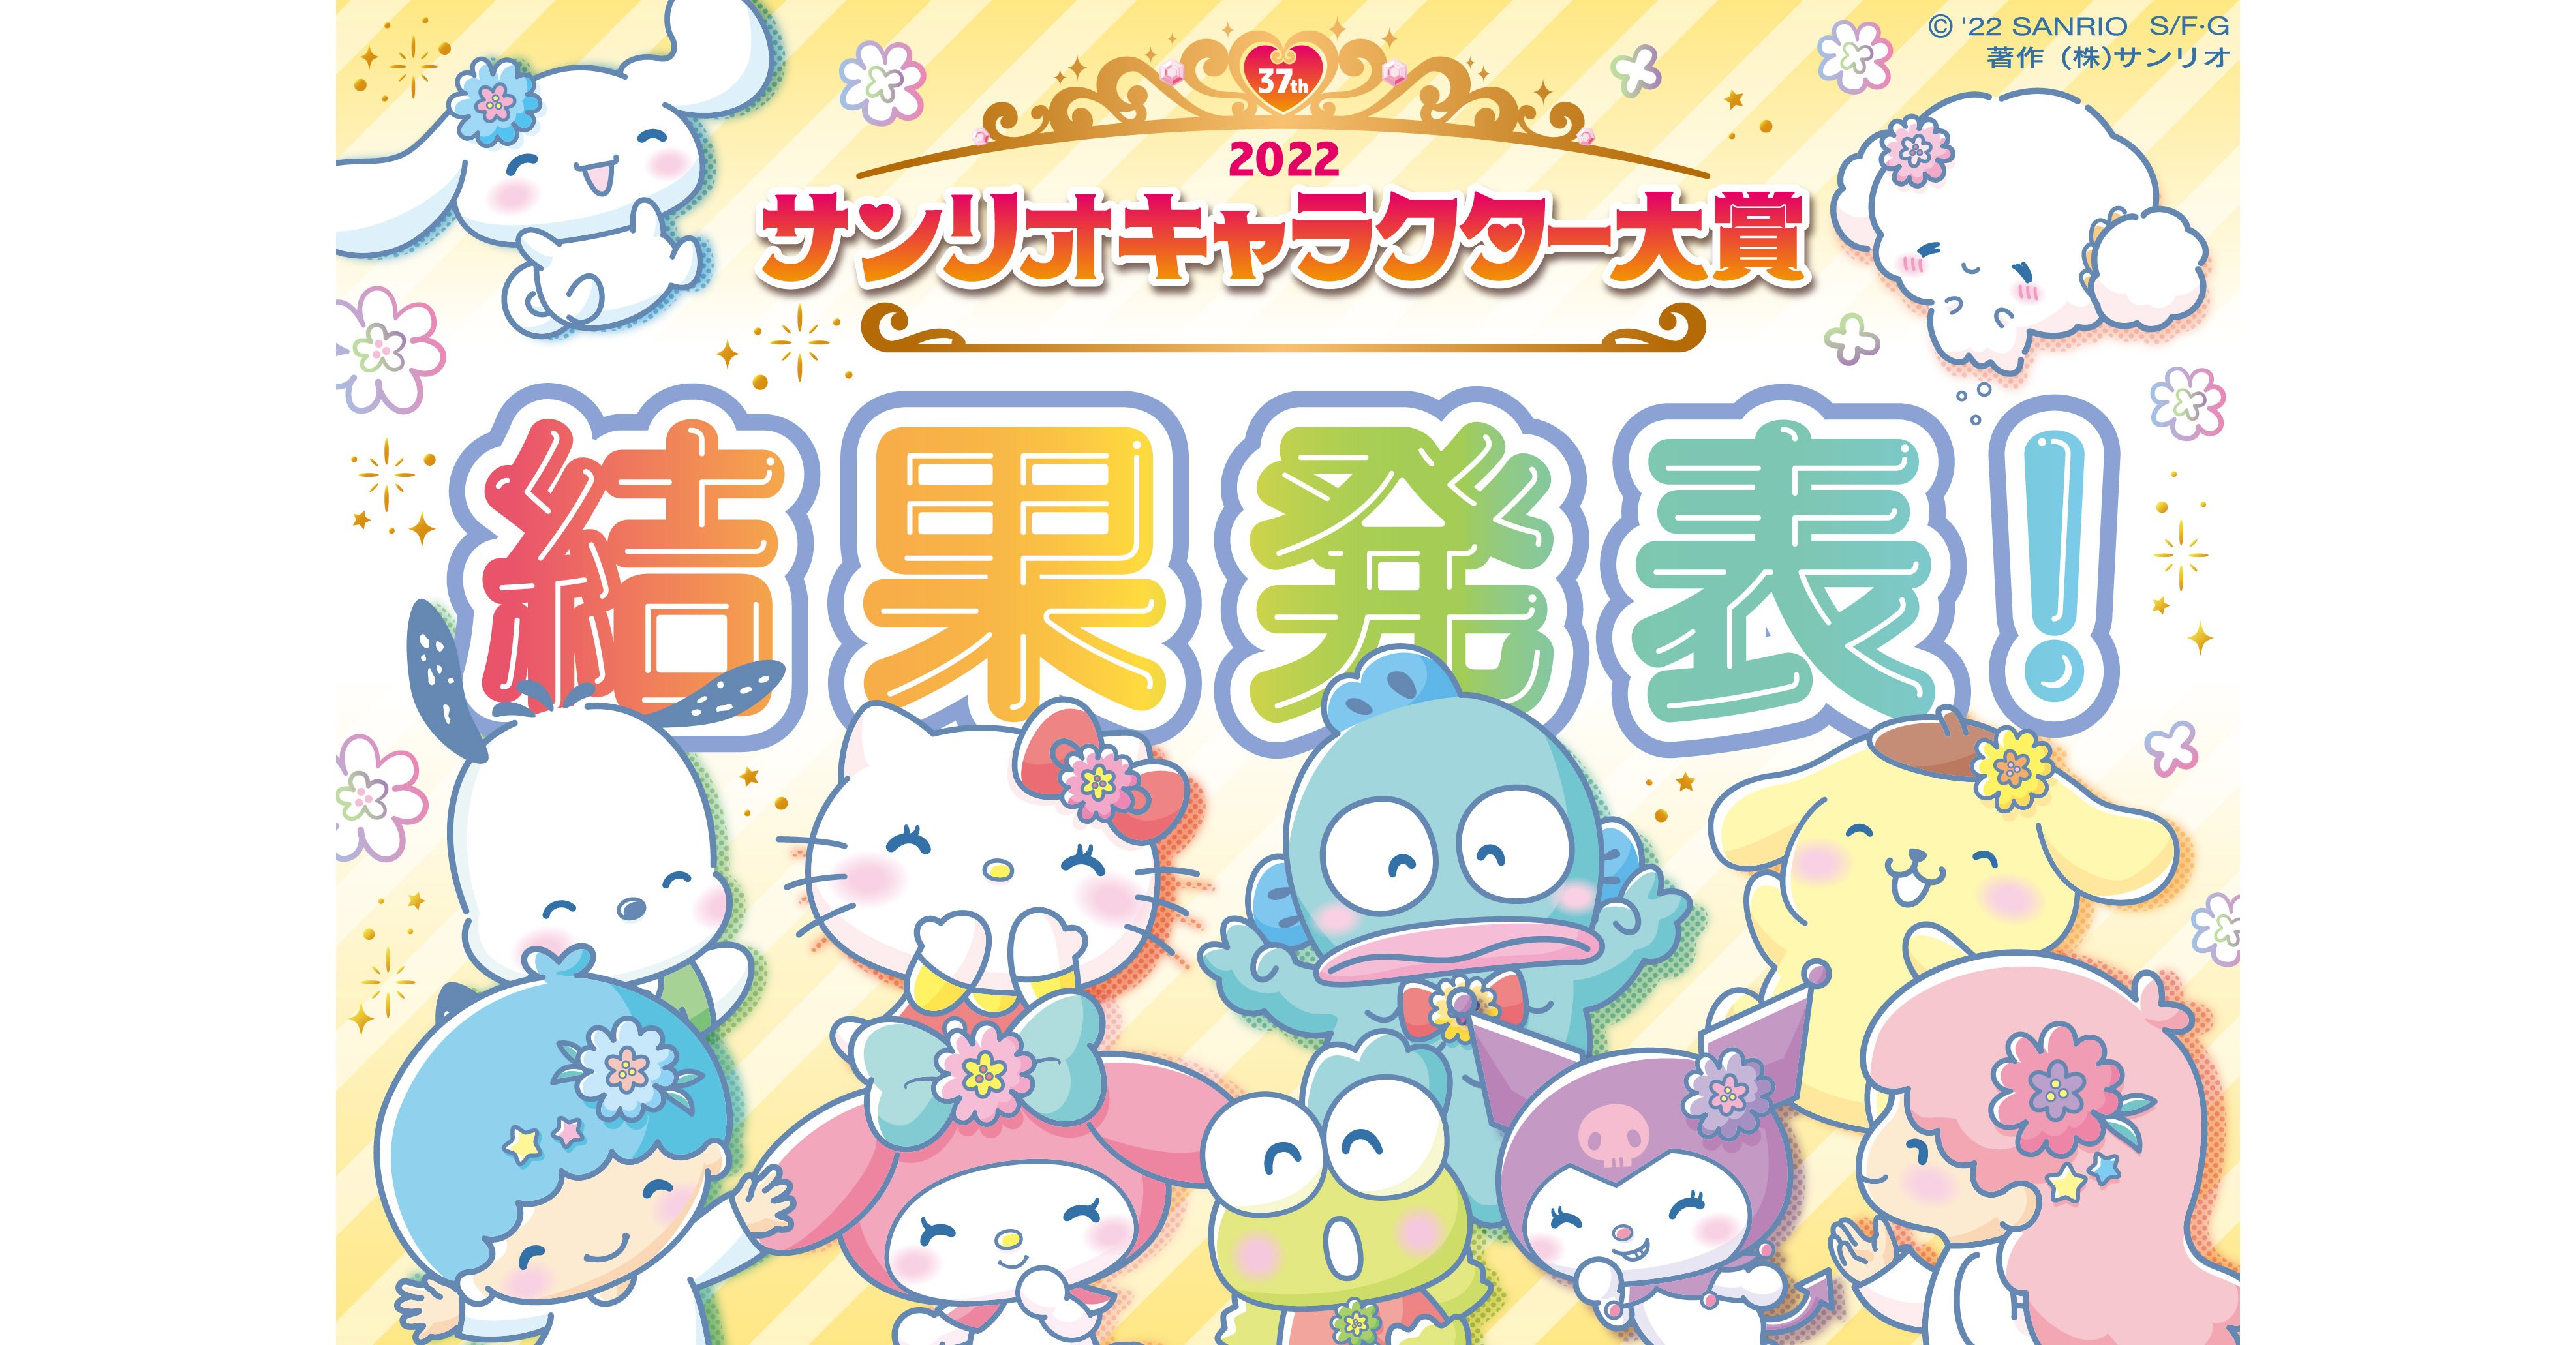 Show By Rock!! Fes A Live x Sanrio Characters Collab Begins on May